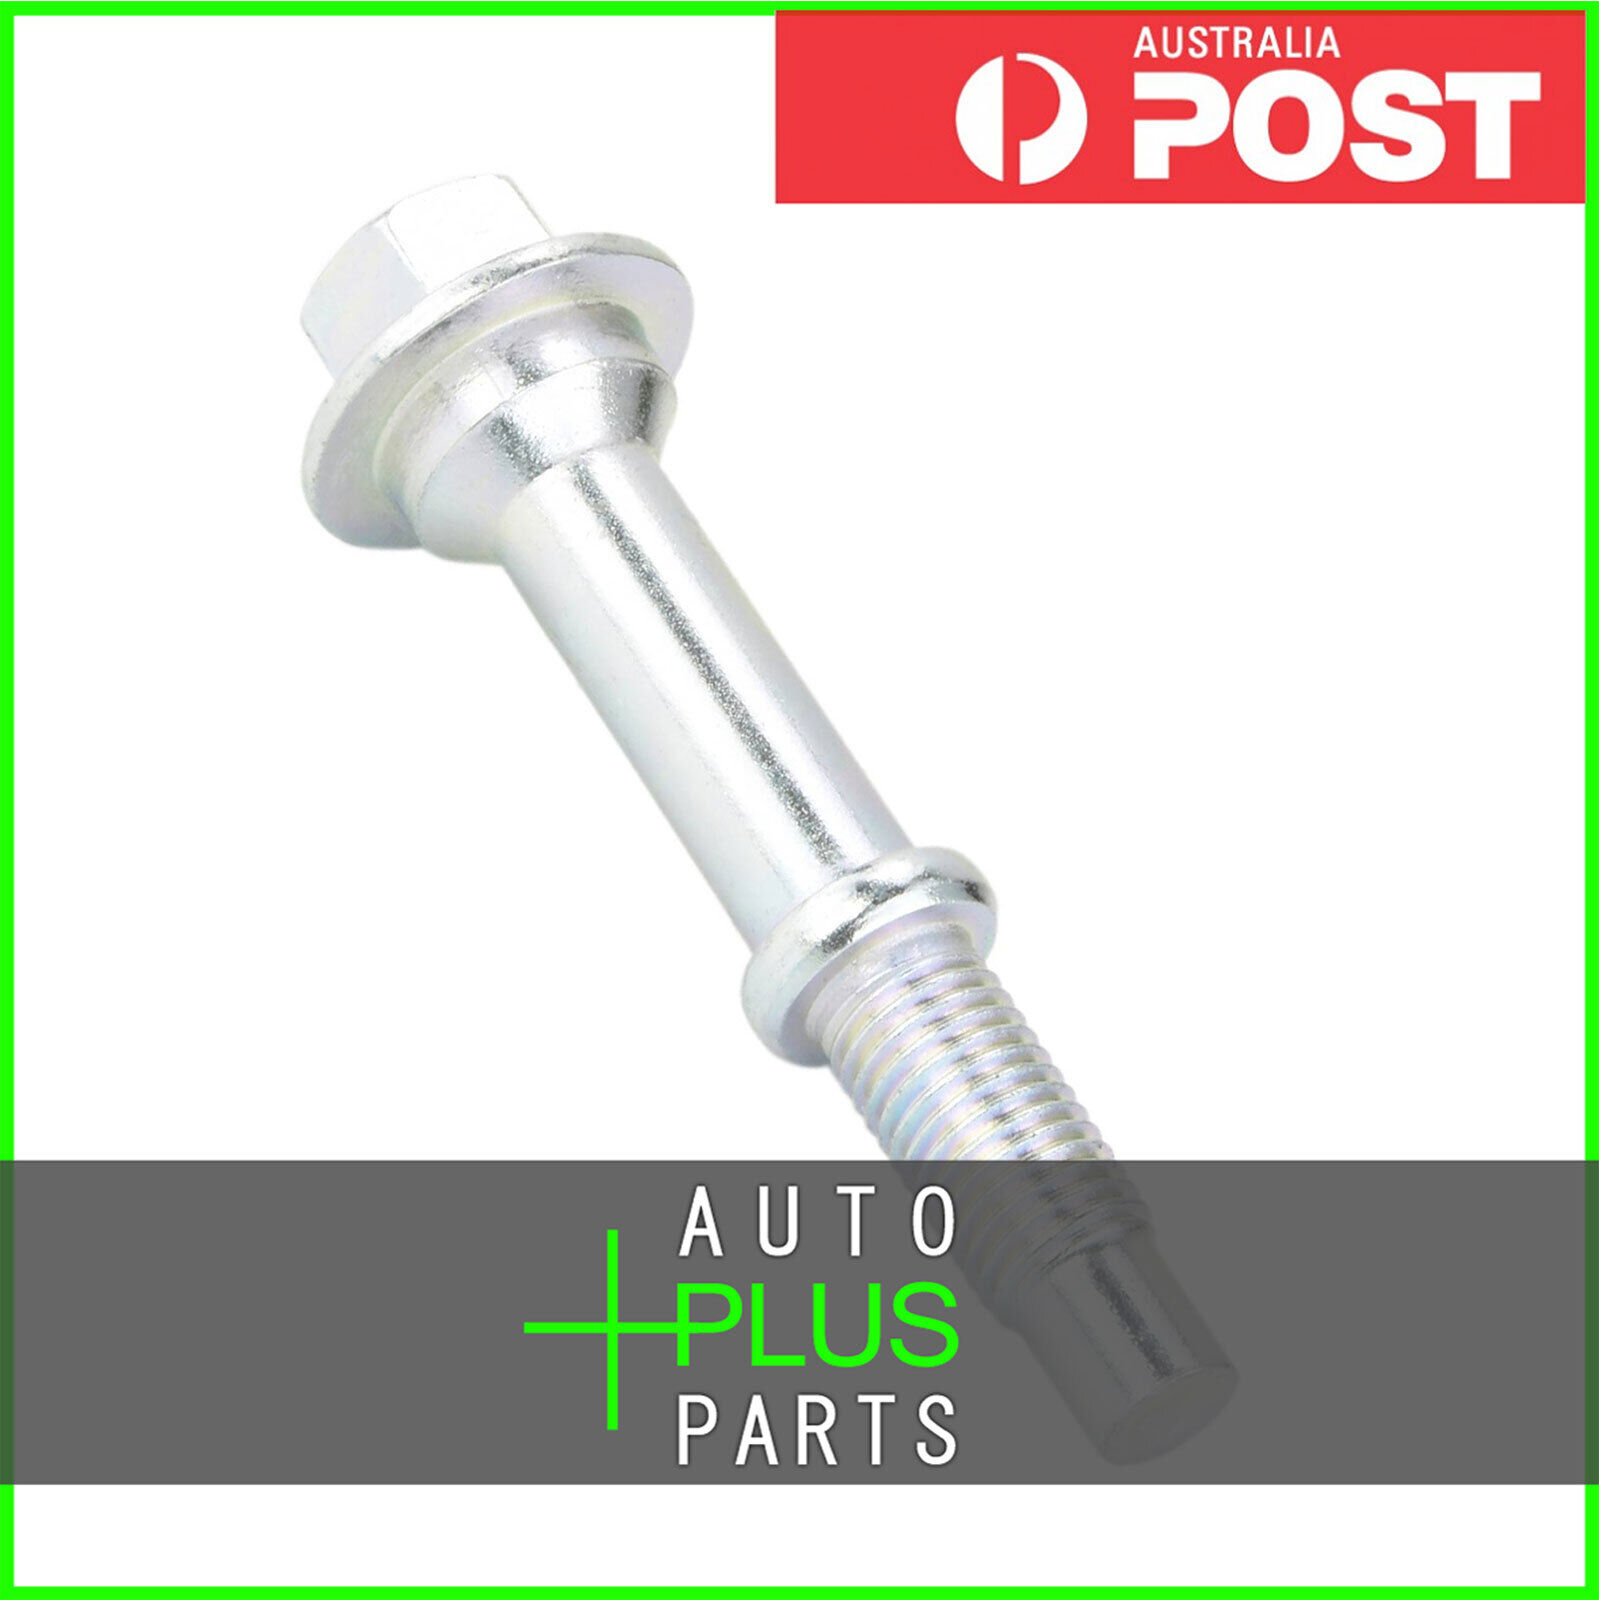 Fits DAIHATSU CUORE EXHAUST PIPE MOUNTING BOLT - L251,L276